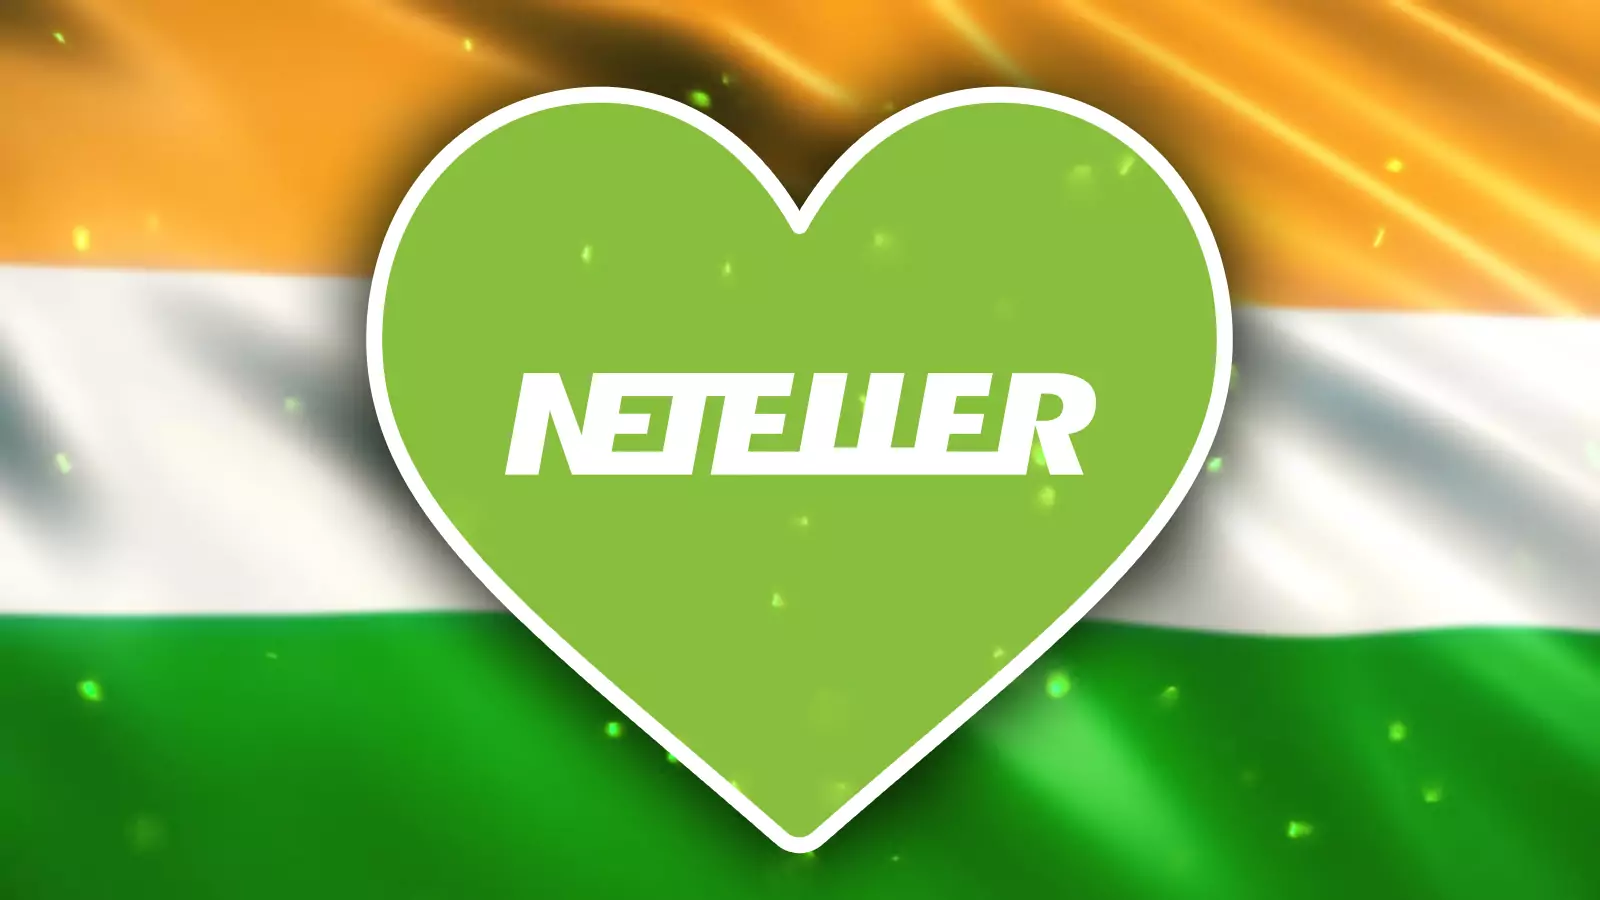 Feel free to make deposits on cricket betting sites via Neteller as it&#039;s a totally legal method.